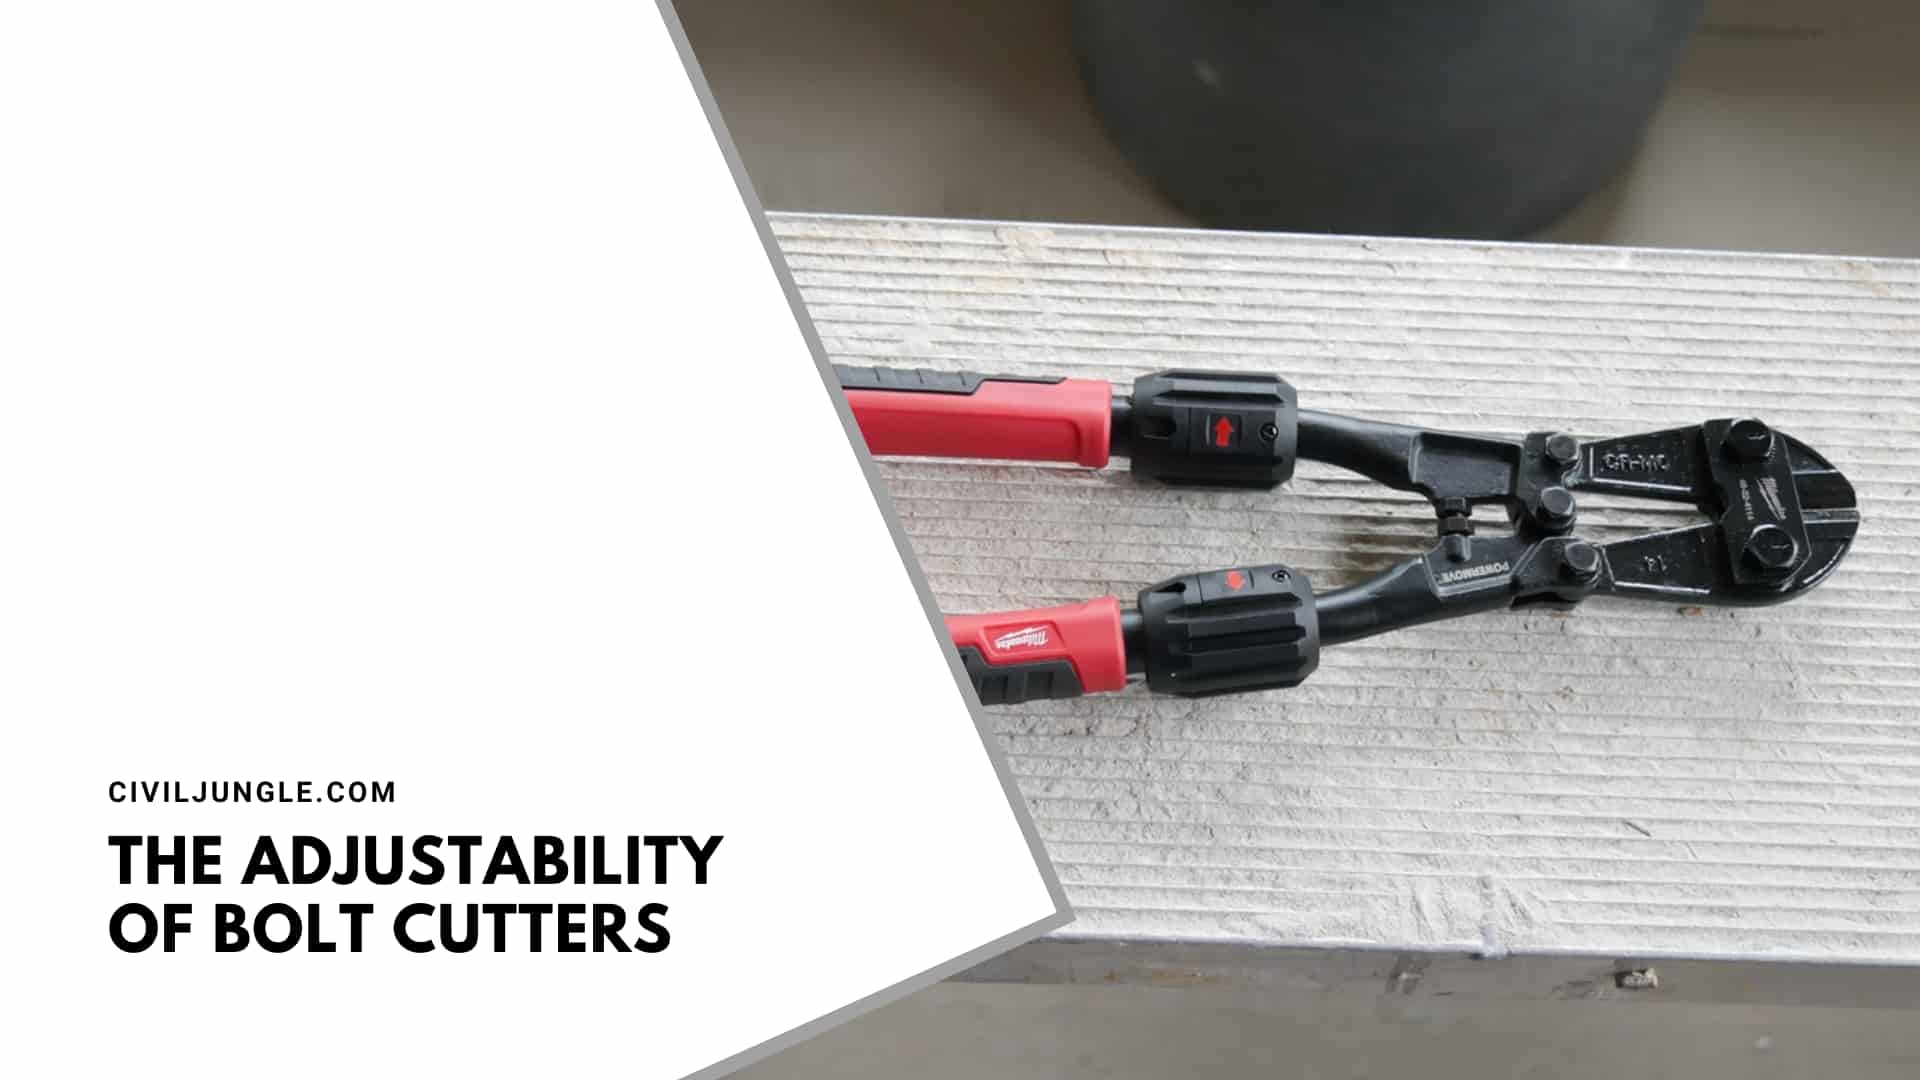 The Adjustability of Bolt Cutters